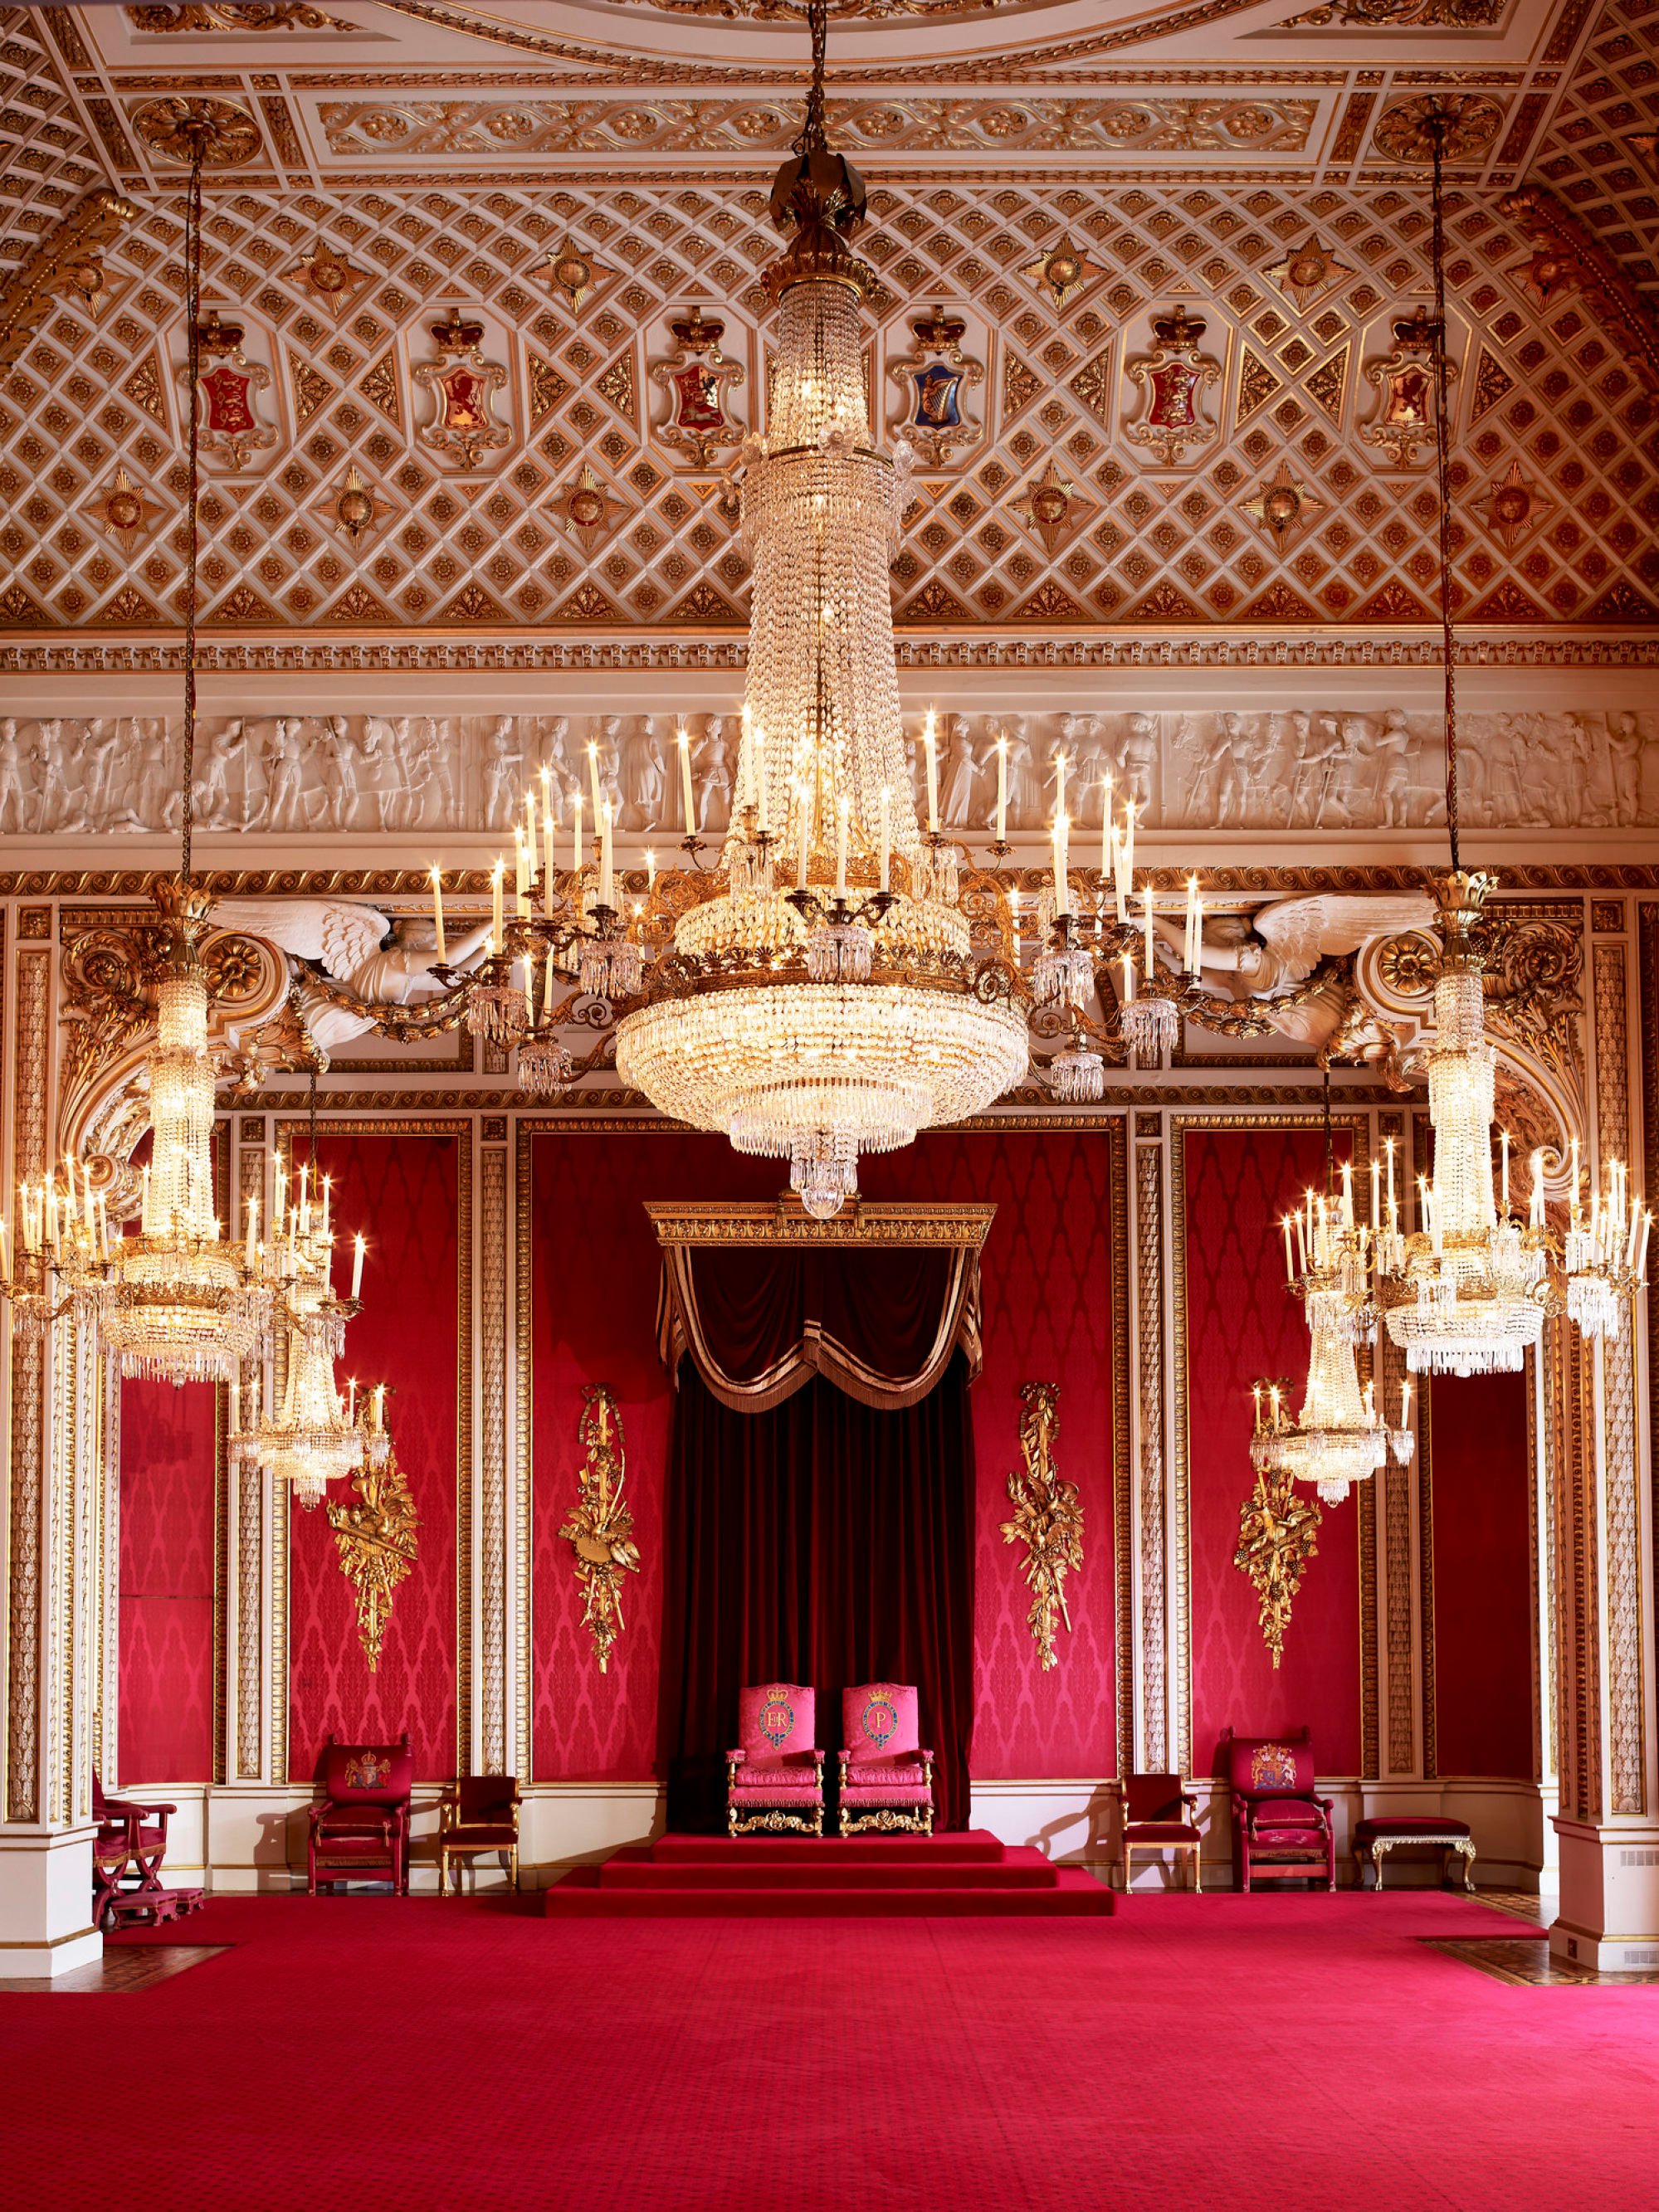 Stage Decorations – My Royal Palace